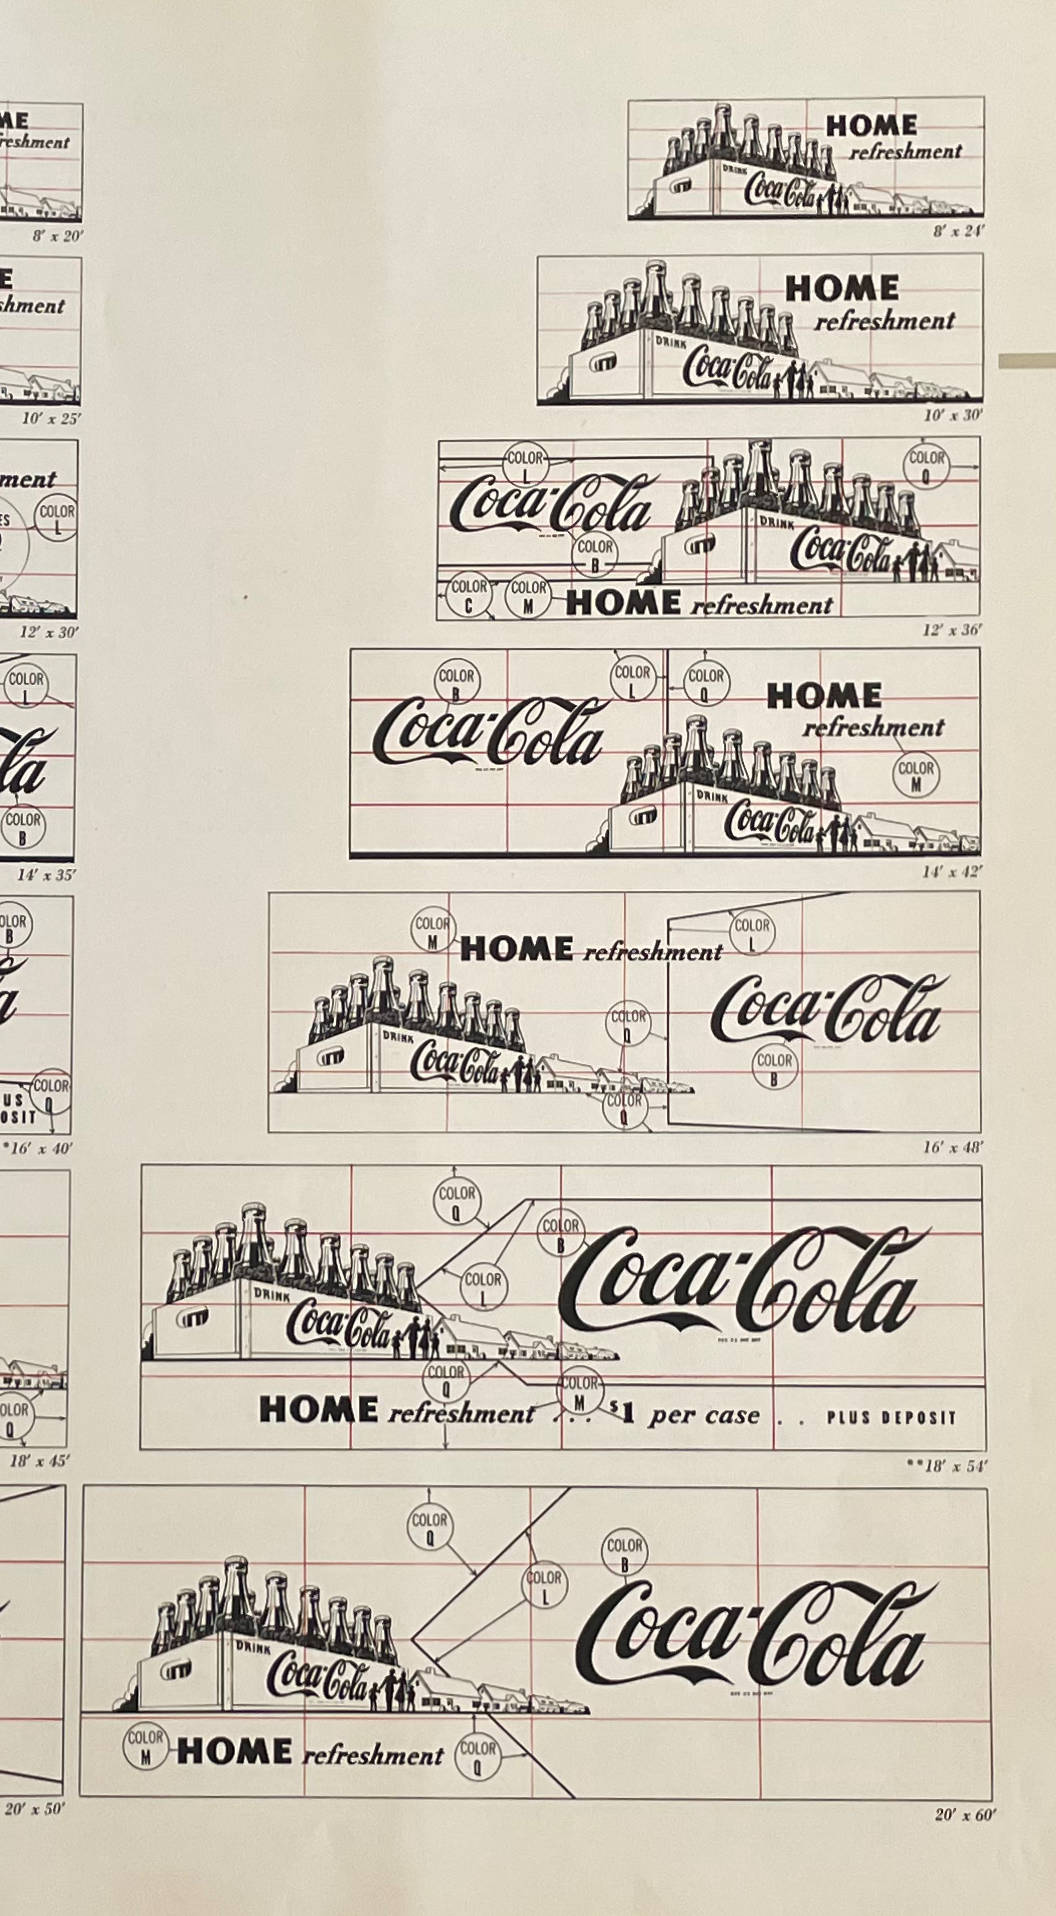 Detail from an enormous mid-century Coco-Cola brand manual at the Letterform Archive demonstrating responsive-esque design